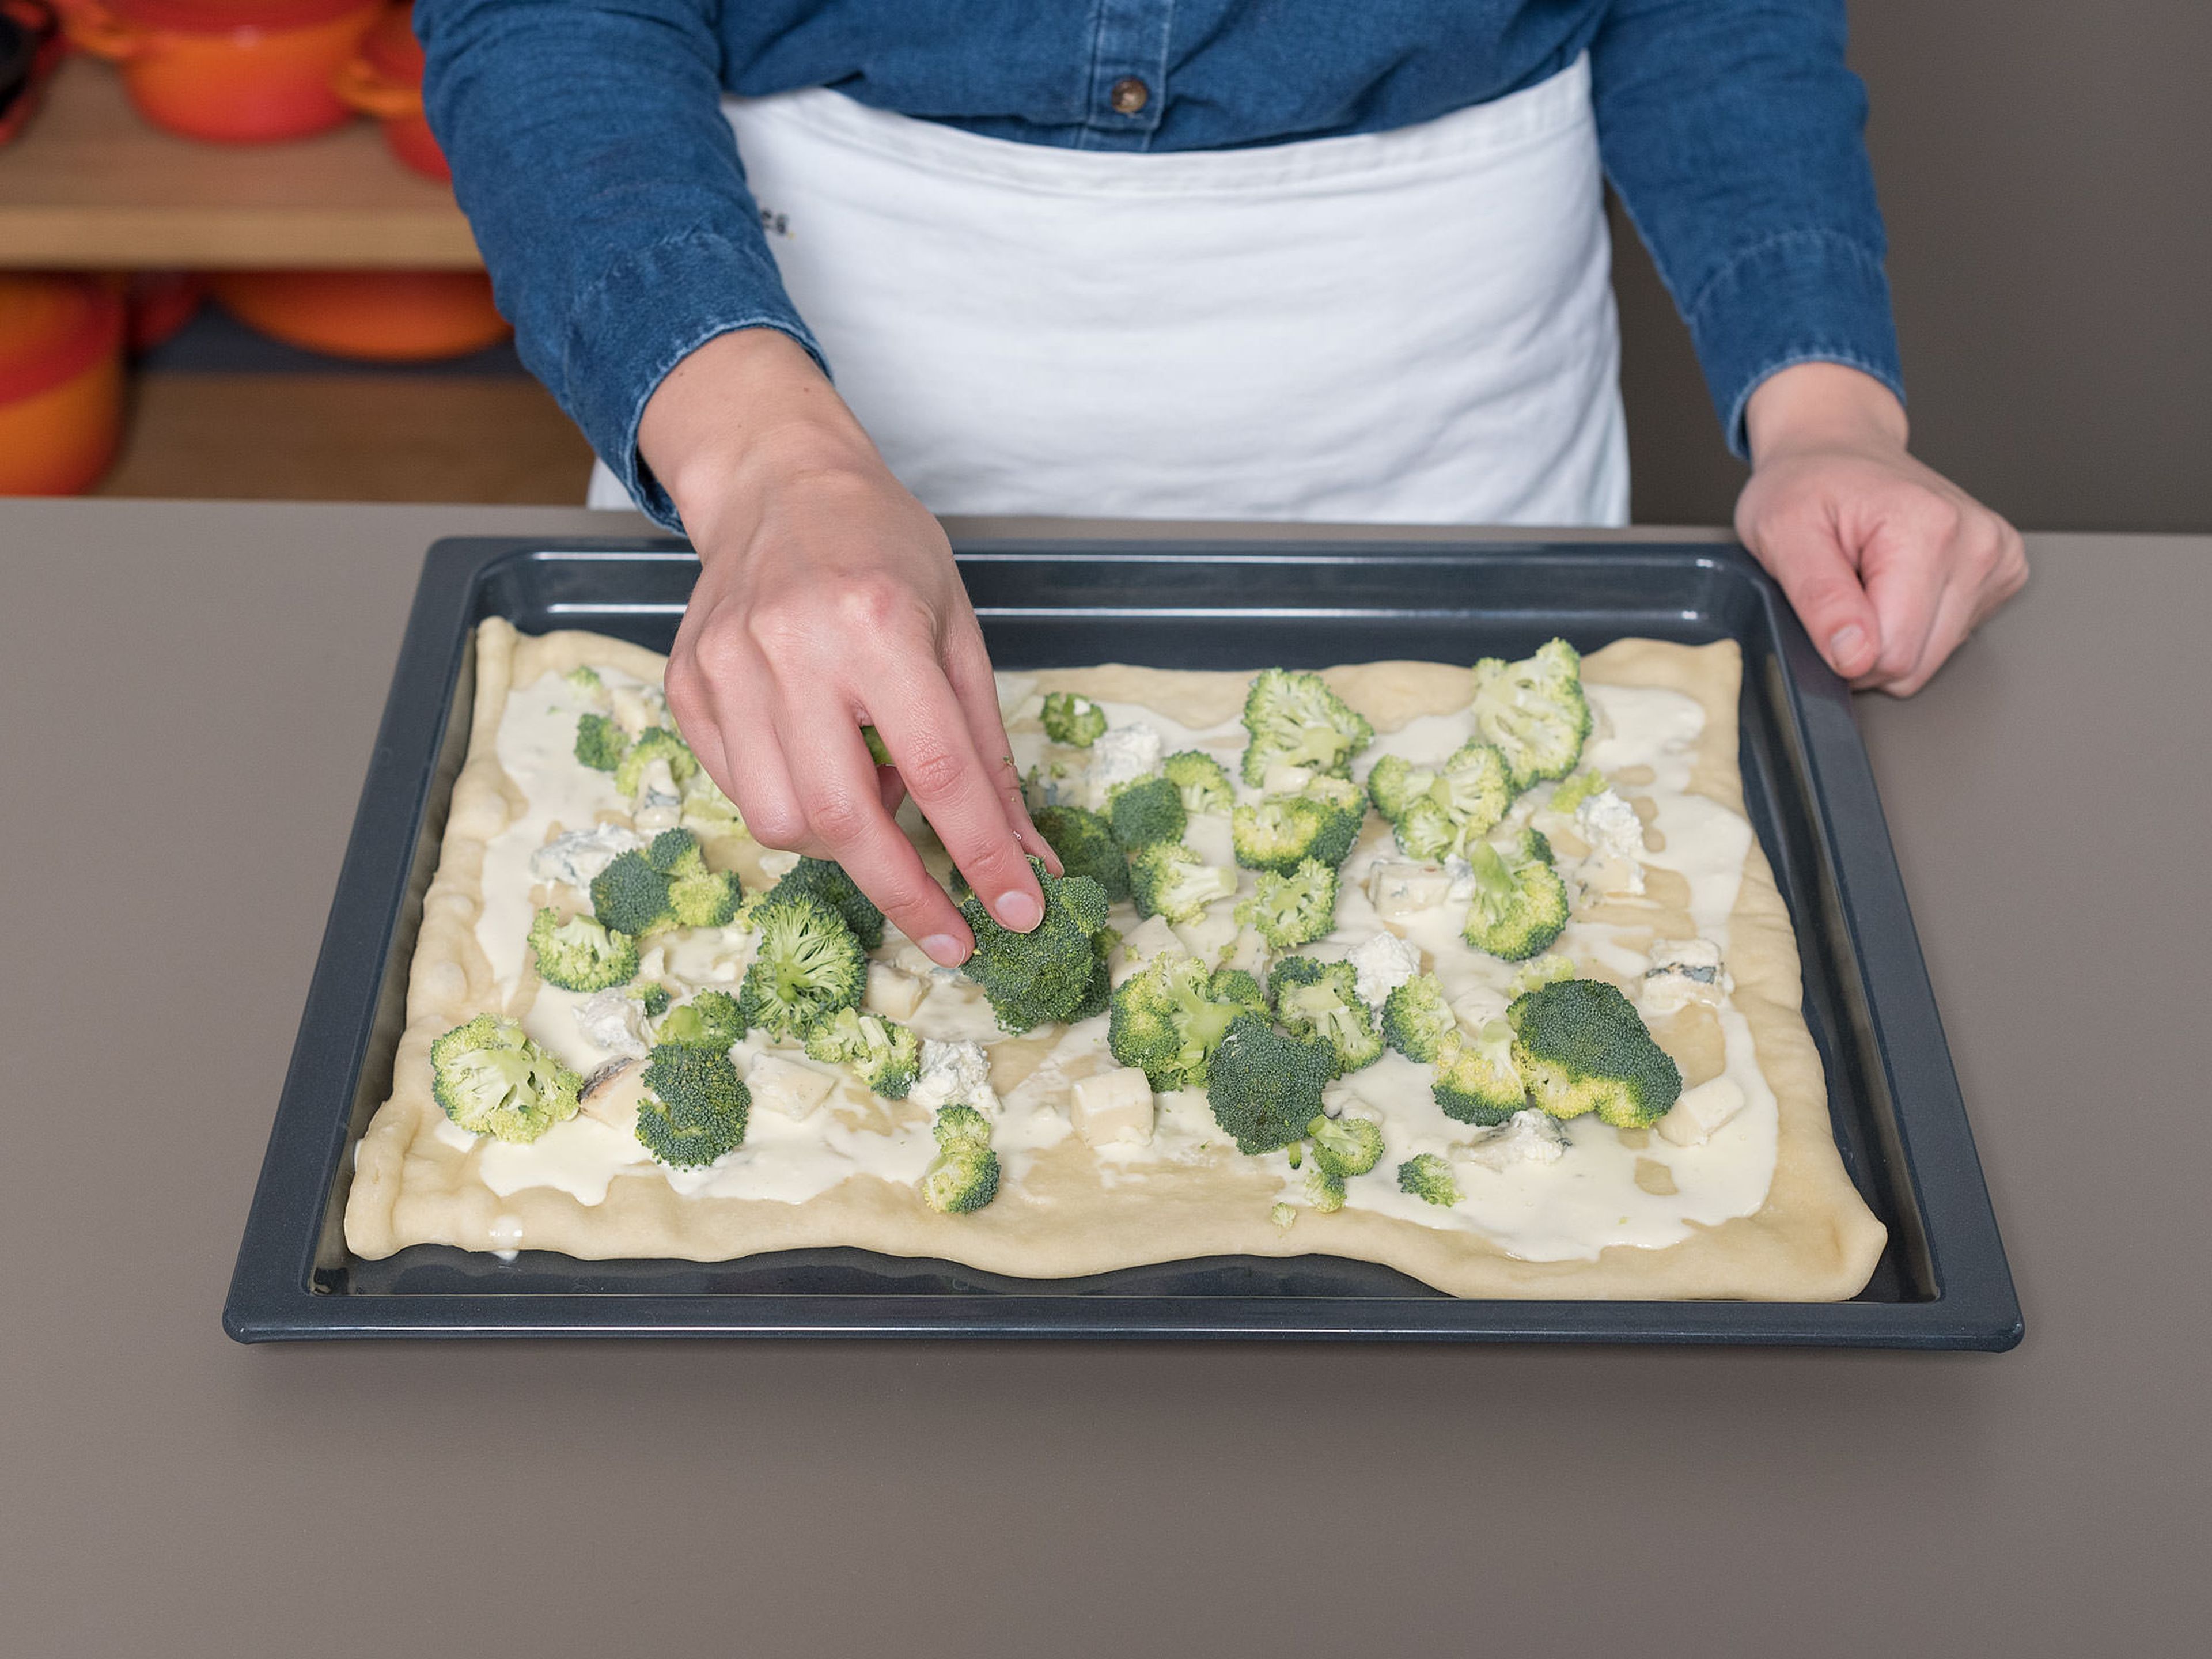 Bake pizza dough in the oven on the lower rack for approx. 4 min., then remove from oven and allow to cool slightly. Spread mascarpone onto the dough, distribute broccoli and gorgonzola evenly on top, and sprinkle with chopped almonds.